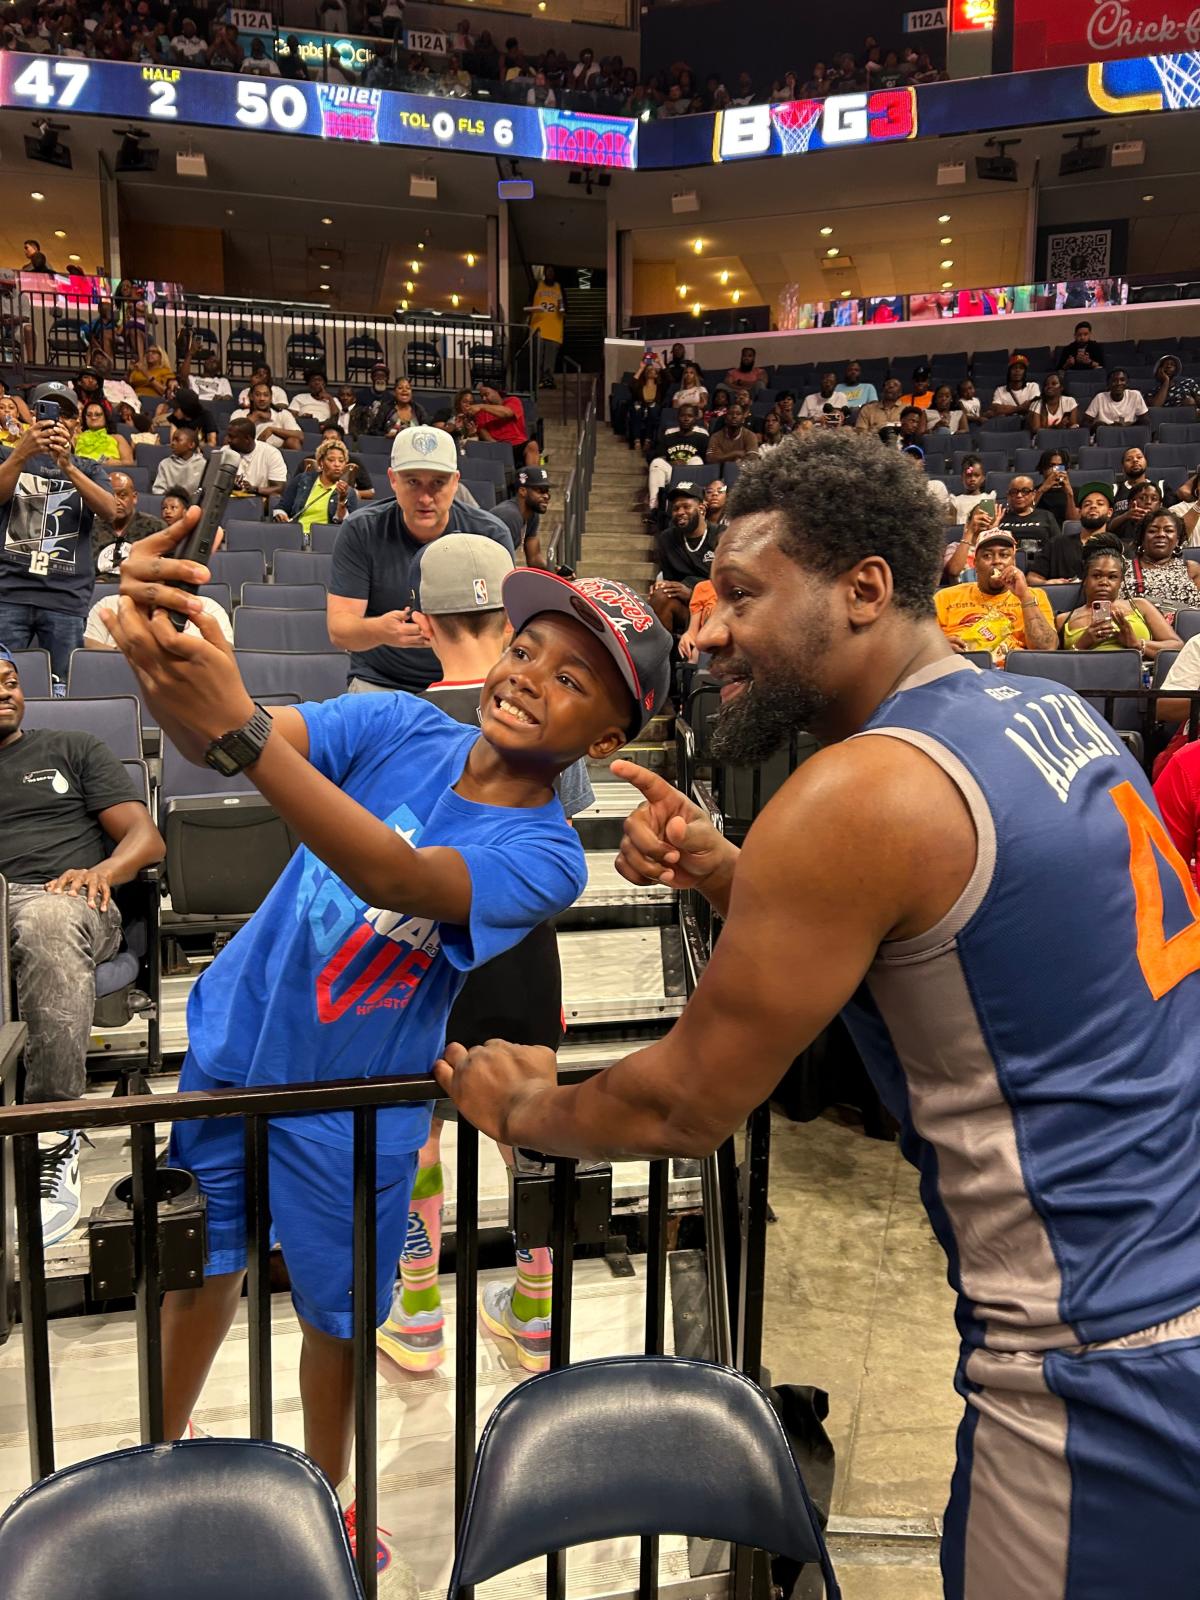 Ice Cube's BIG3 brings retired NBA players back to old-school